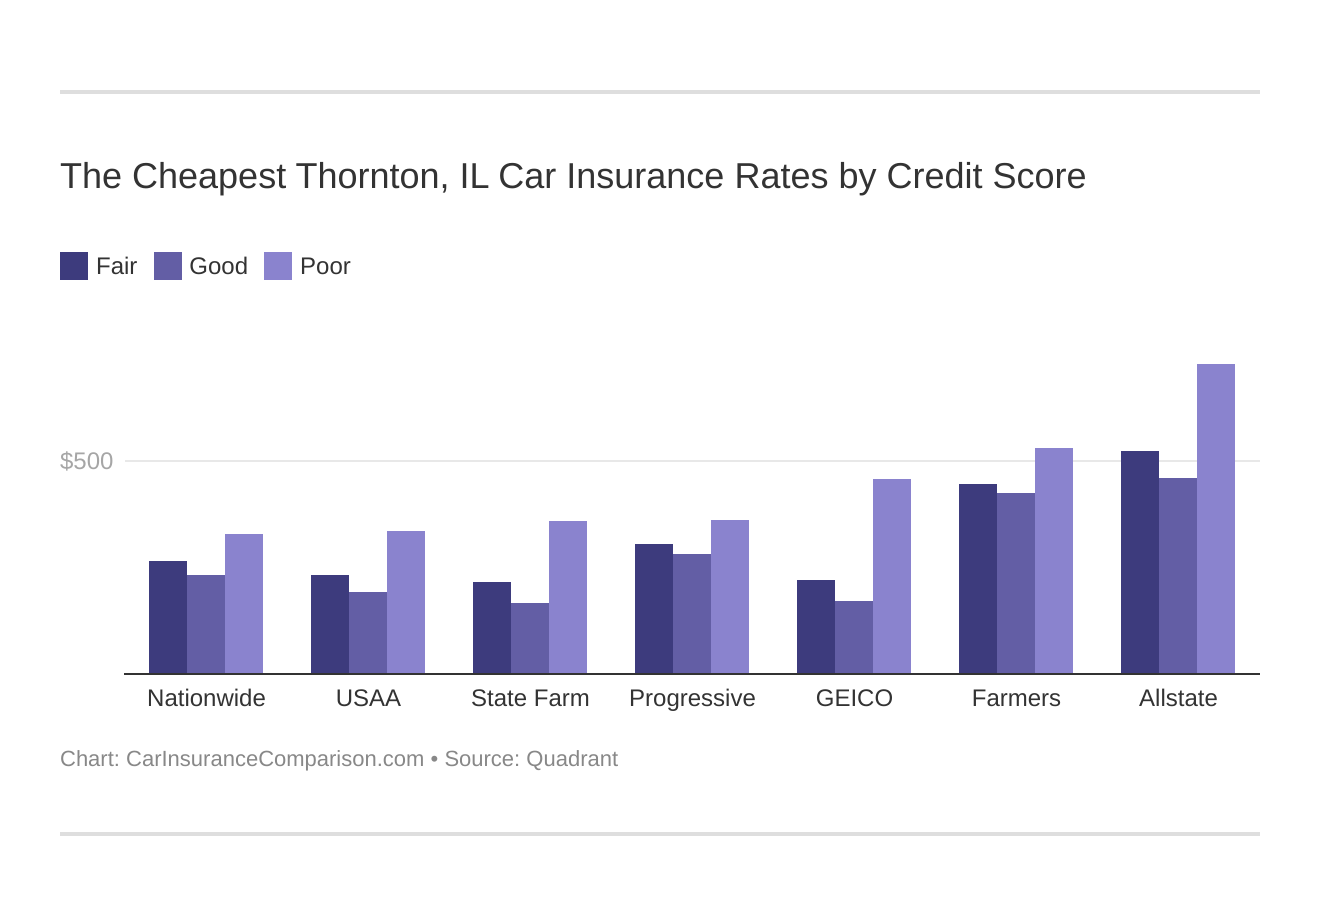 The Cheapest Thornton, IL Car Insurance Rates by Credit Score